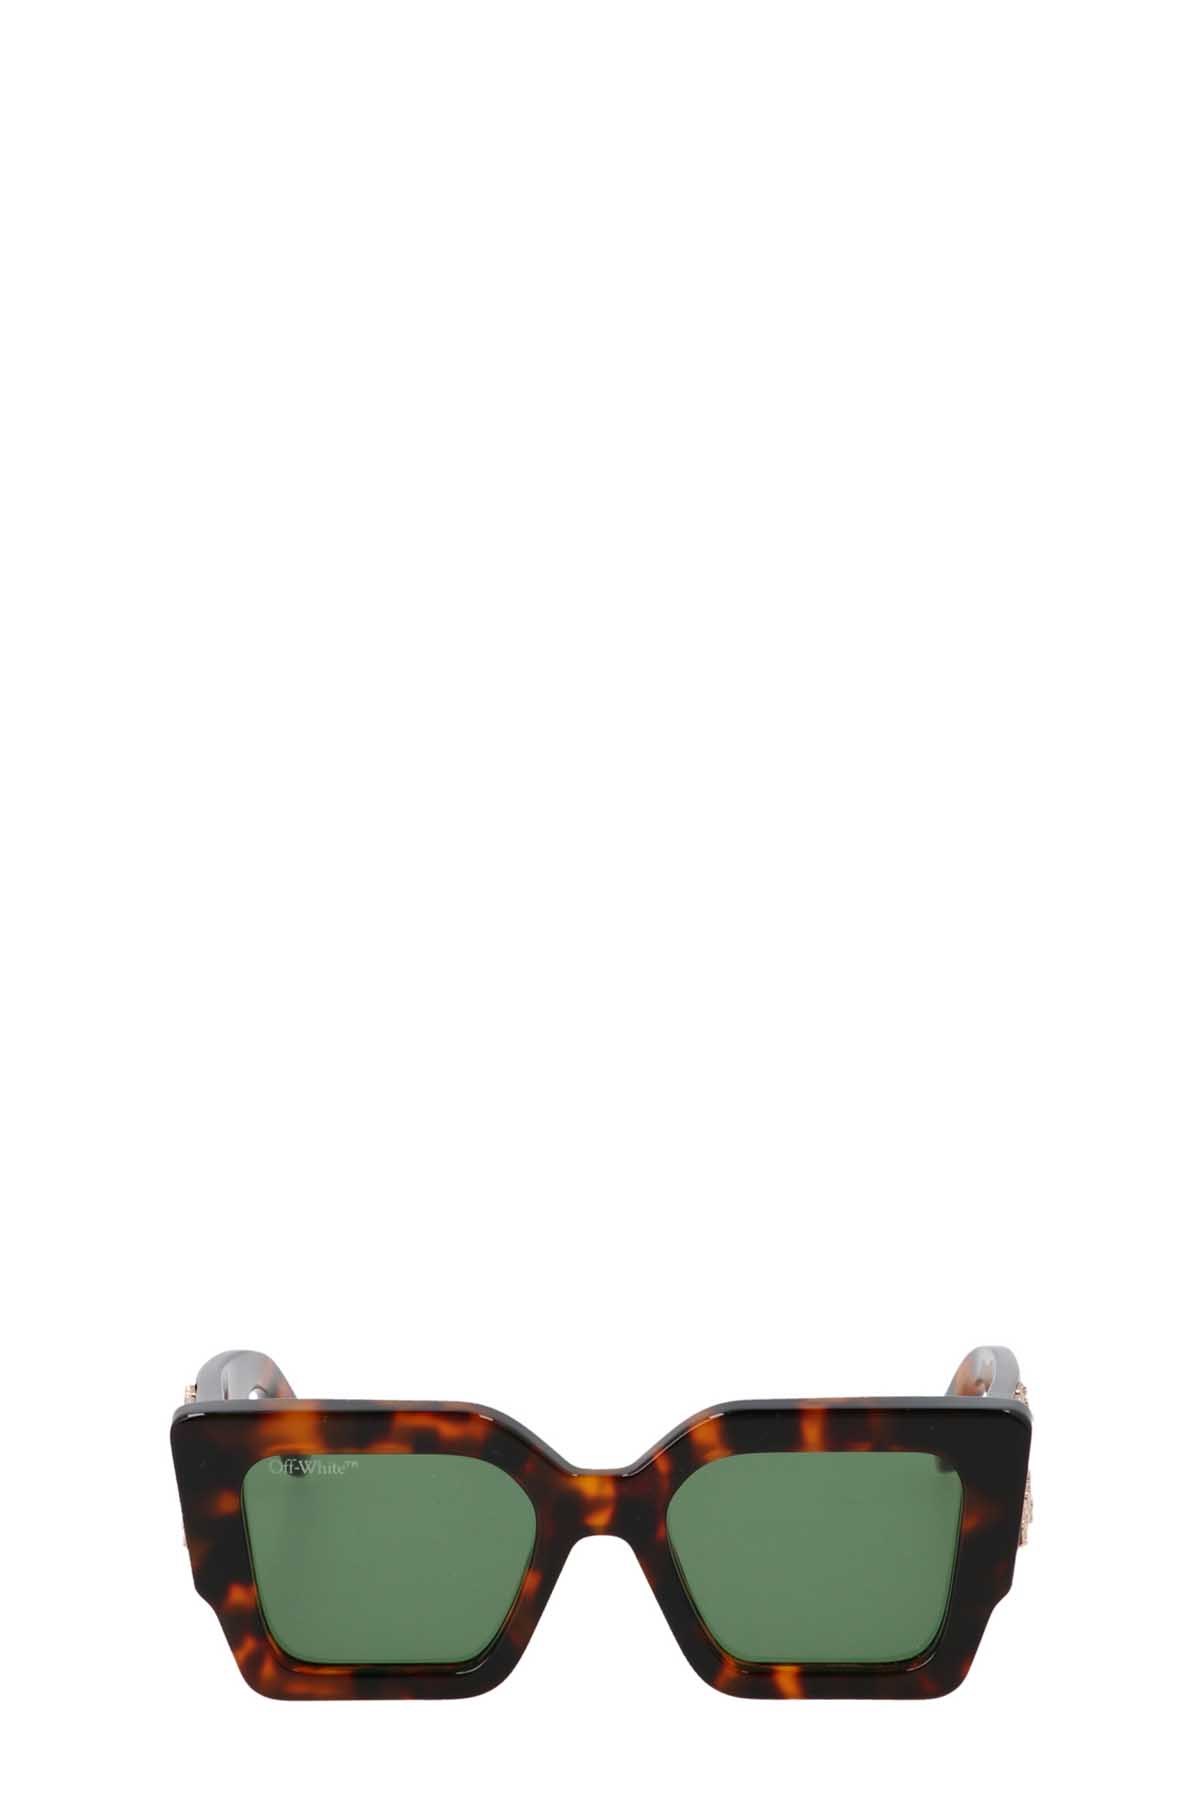 OFF-WHITE Sonnenbrille 'Catalina'